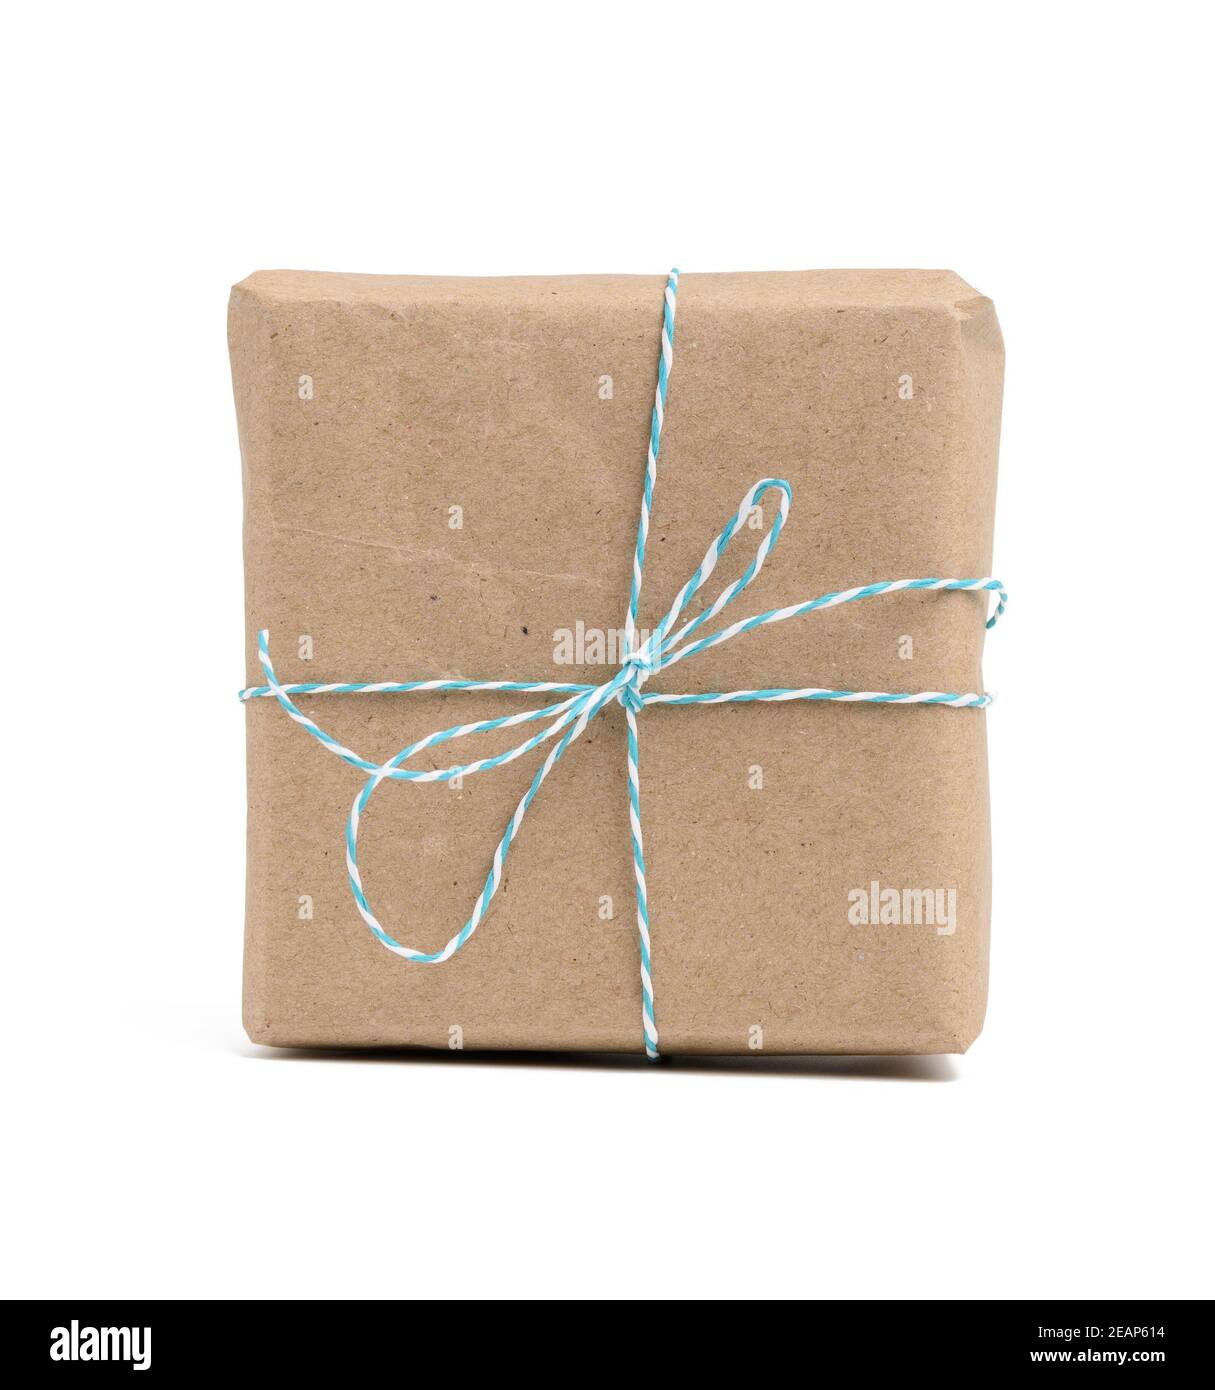 square box wrapped in brown kraft paper and tied with rope Stock Photo